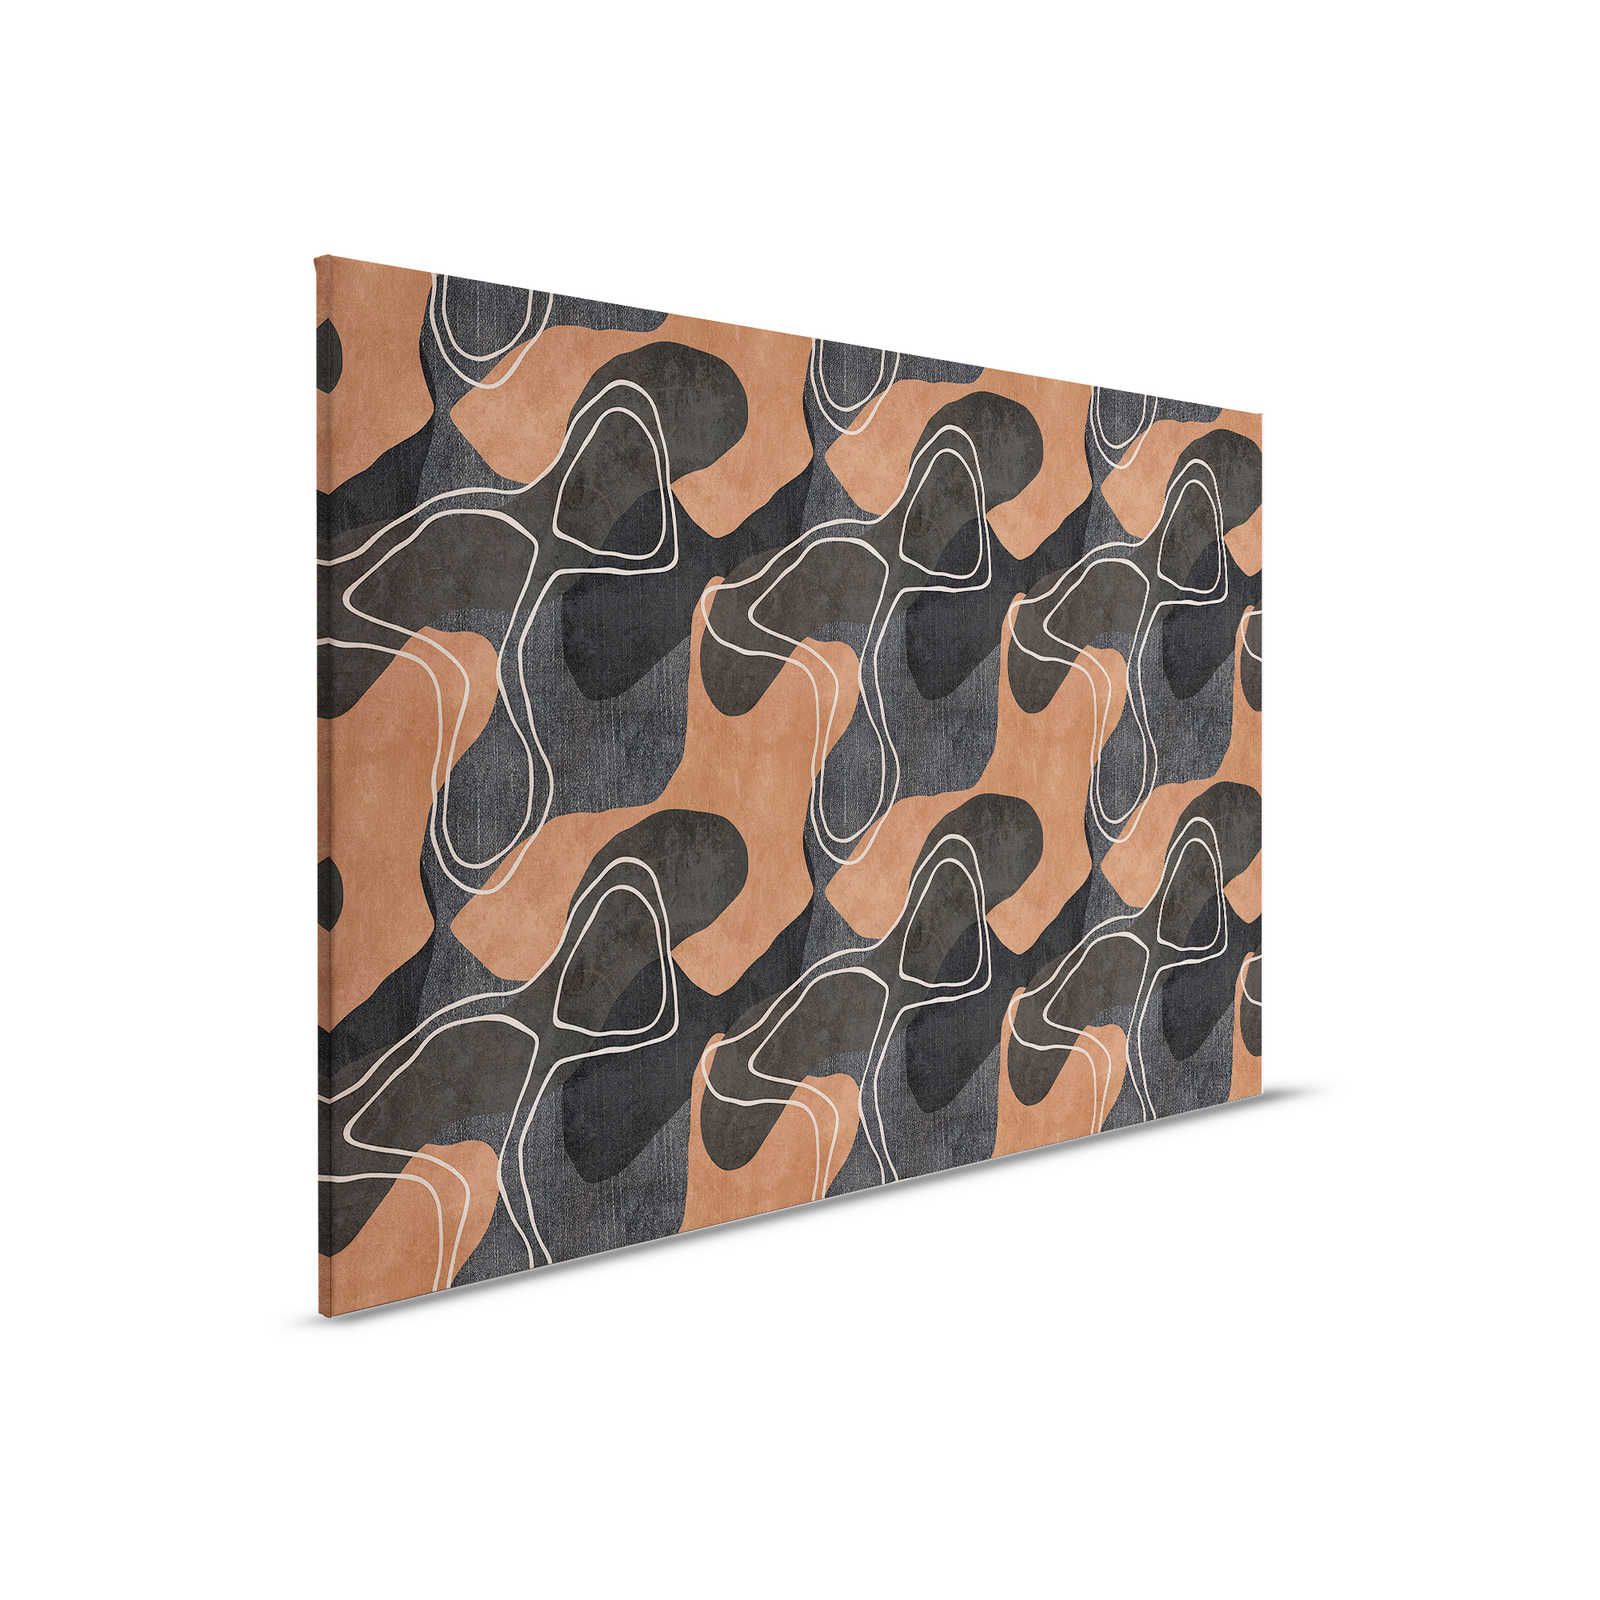         Terra 1 - Ethno canvas painting with abstract design in earth tones - 0.90 m x 0.60 m
    